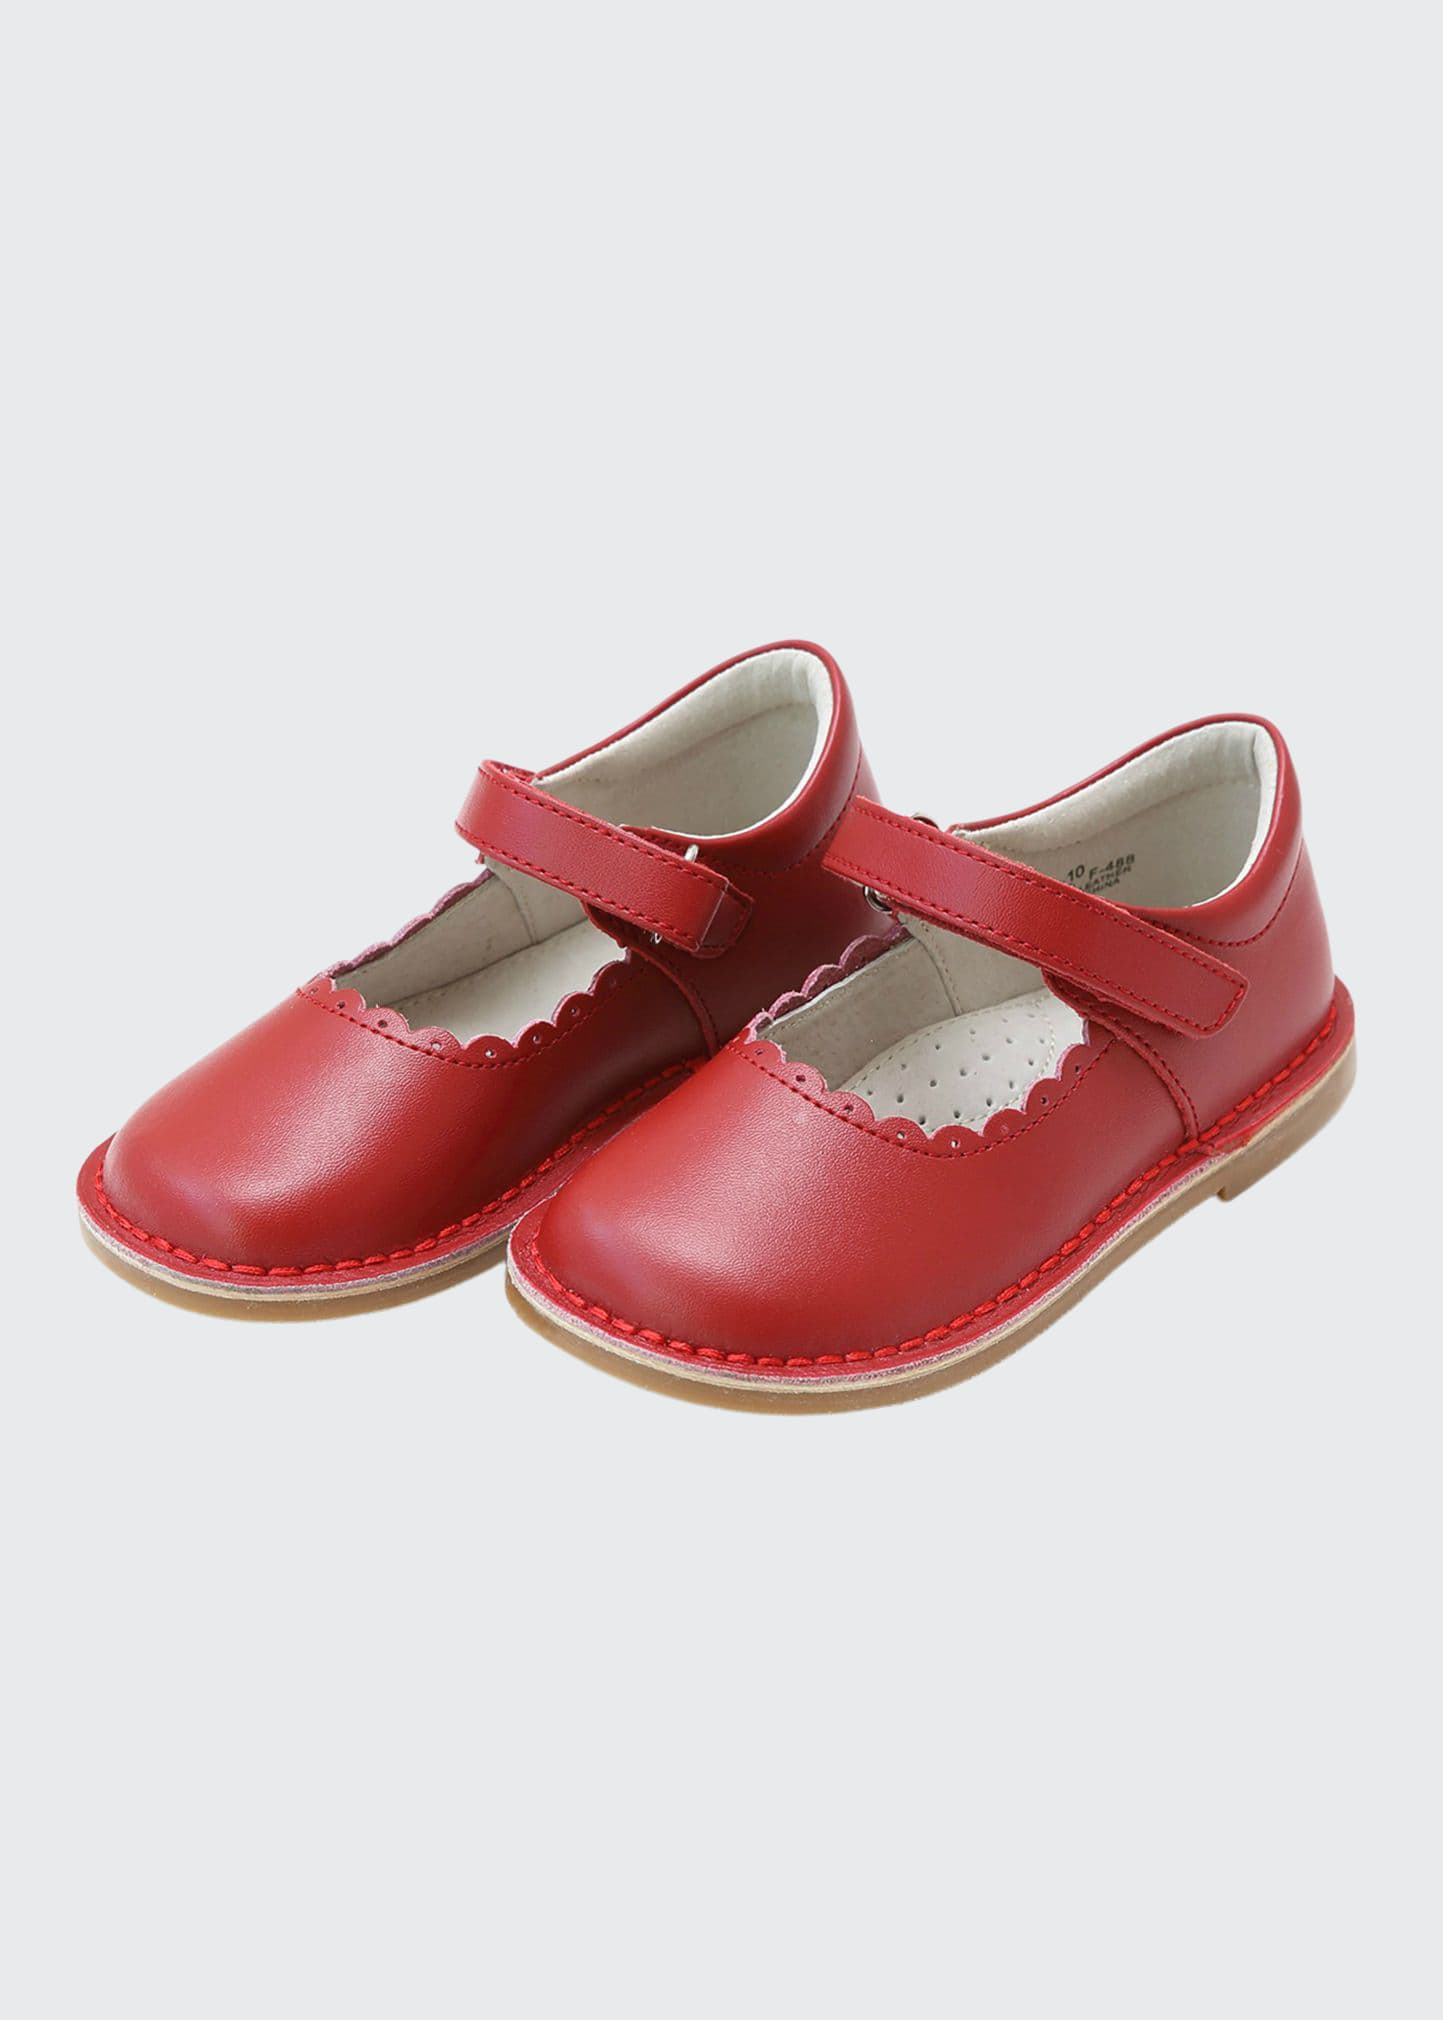 L'amour Shoes Kids' Girl's Caitlin Scalloped Grip-strap Mary Jane Shoes, Baby/toddlers